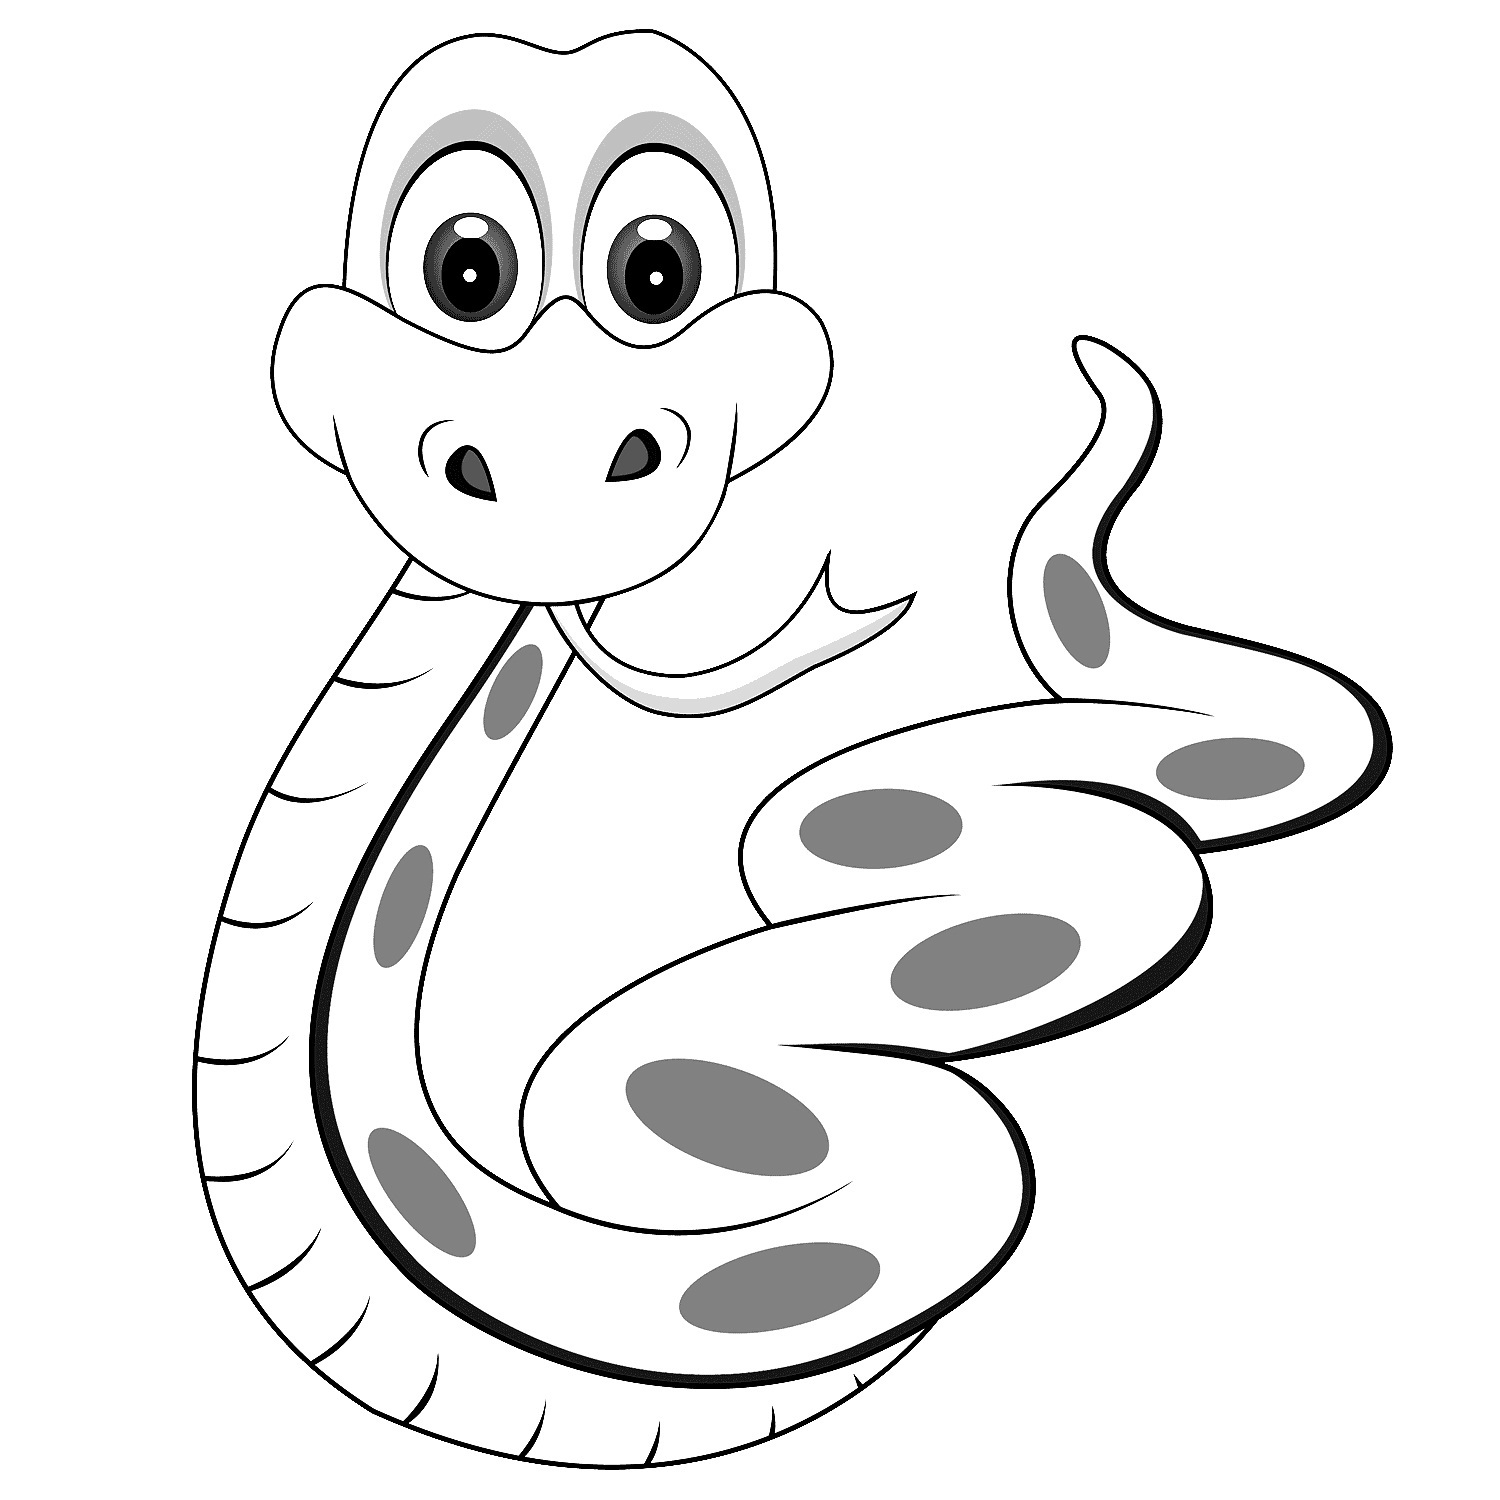 Printable Snake Coloring Pages | ColoringMe.com